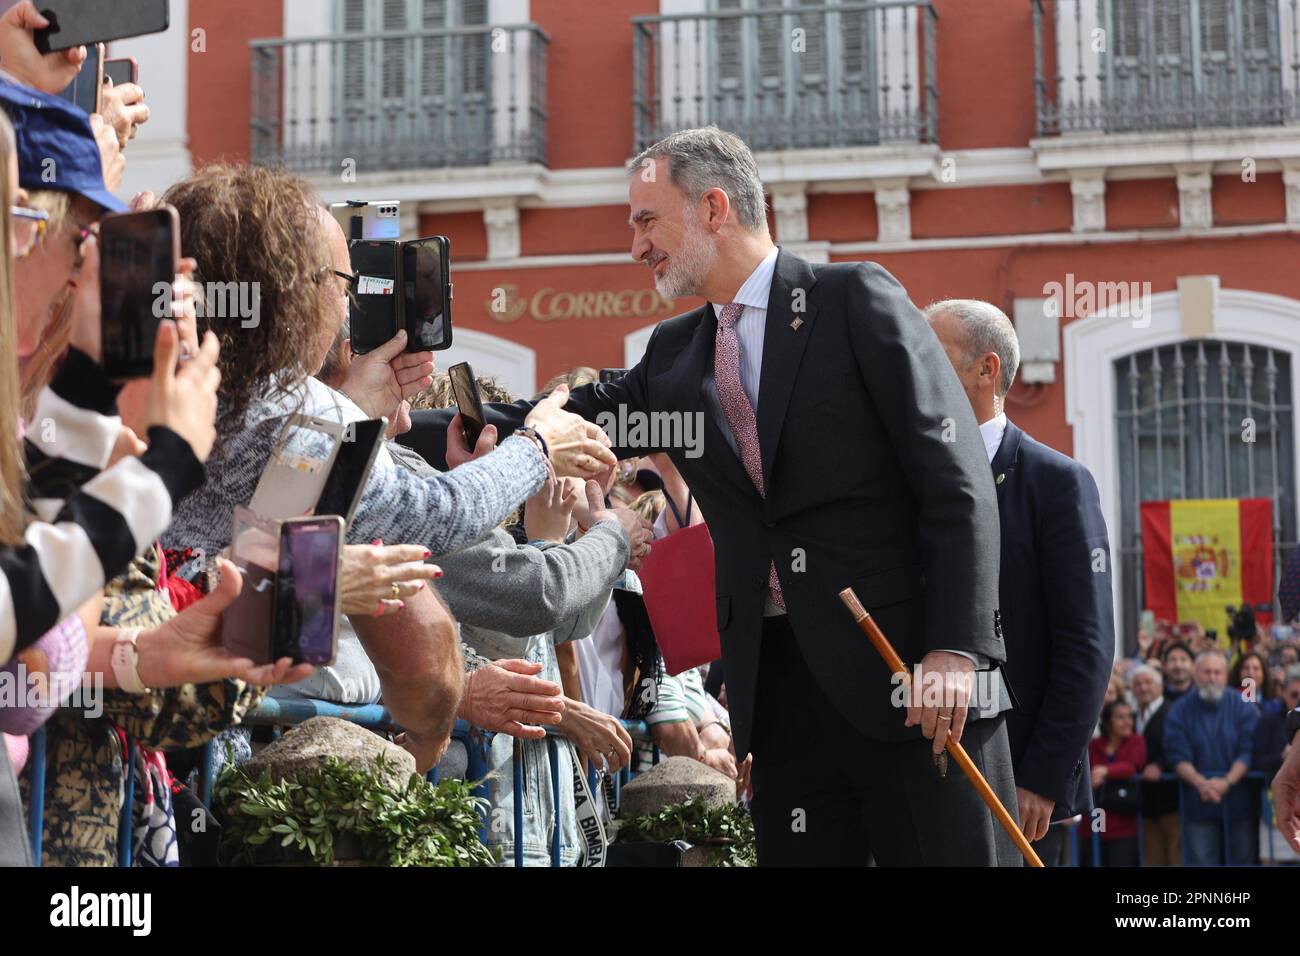 April 19, 2023 (Ronda, Malaga) Felipe VI is received by dozens of people upon his arrival at the bullring to participate in the commemoration of the 450th anniversary of the Real Maestranza de Caballería de Ronda. It was attended by some 2,500 schoolchildren from the Serranía de Ronda. Credit: CORDON PRESS/Alamy Live News Stock Photo